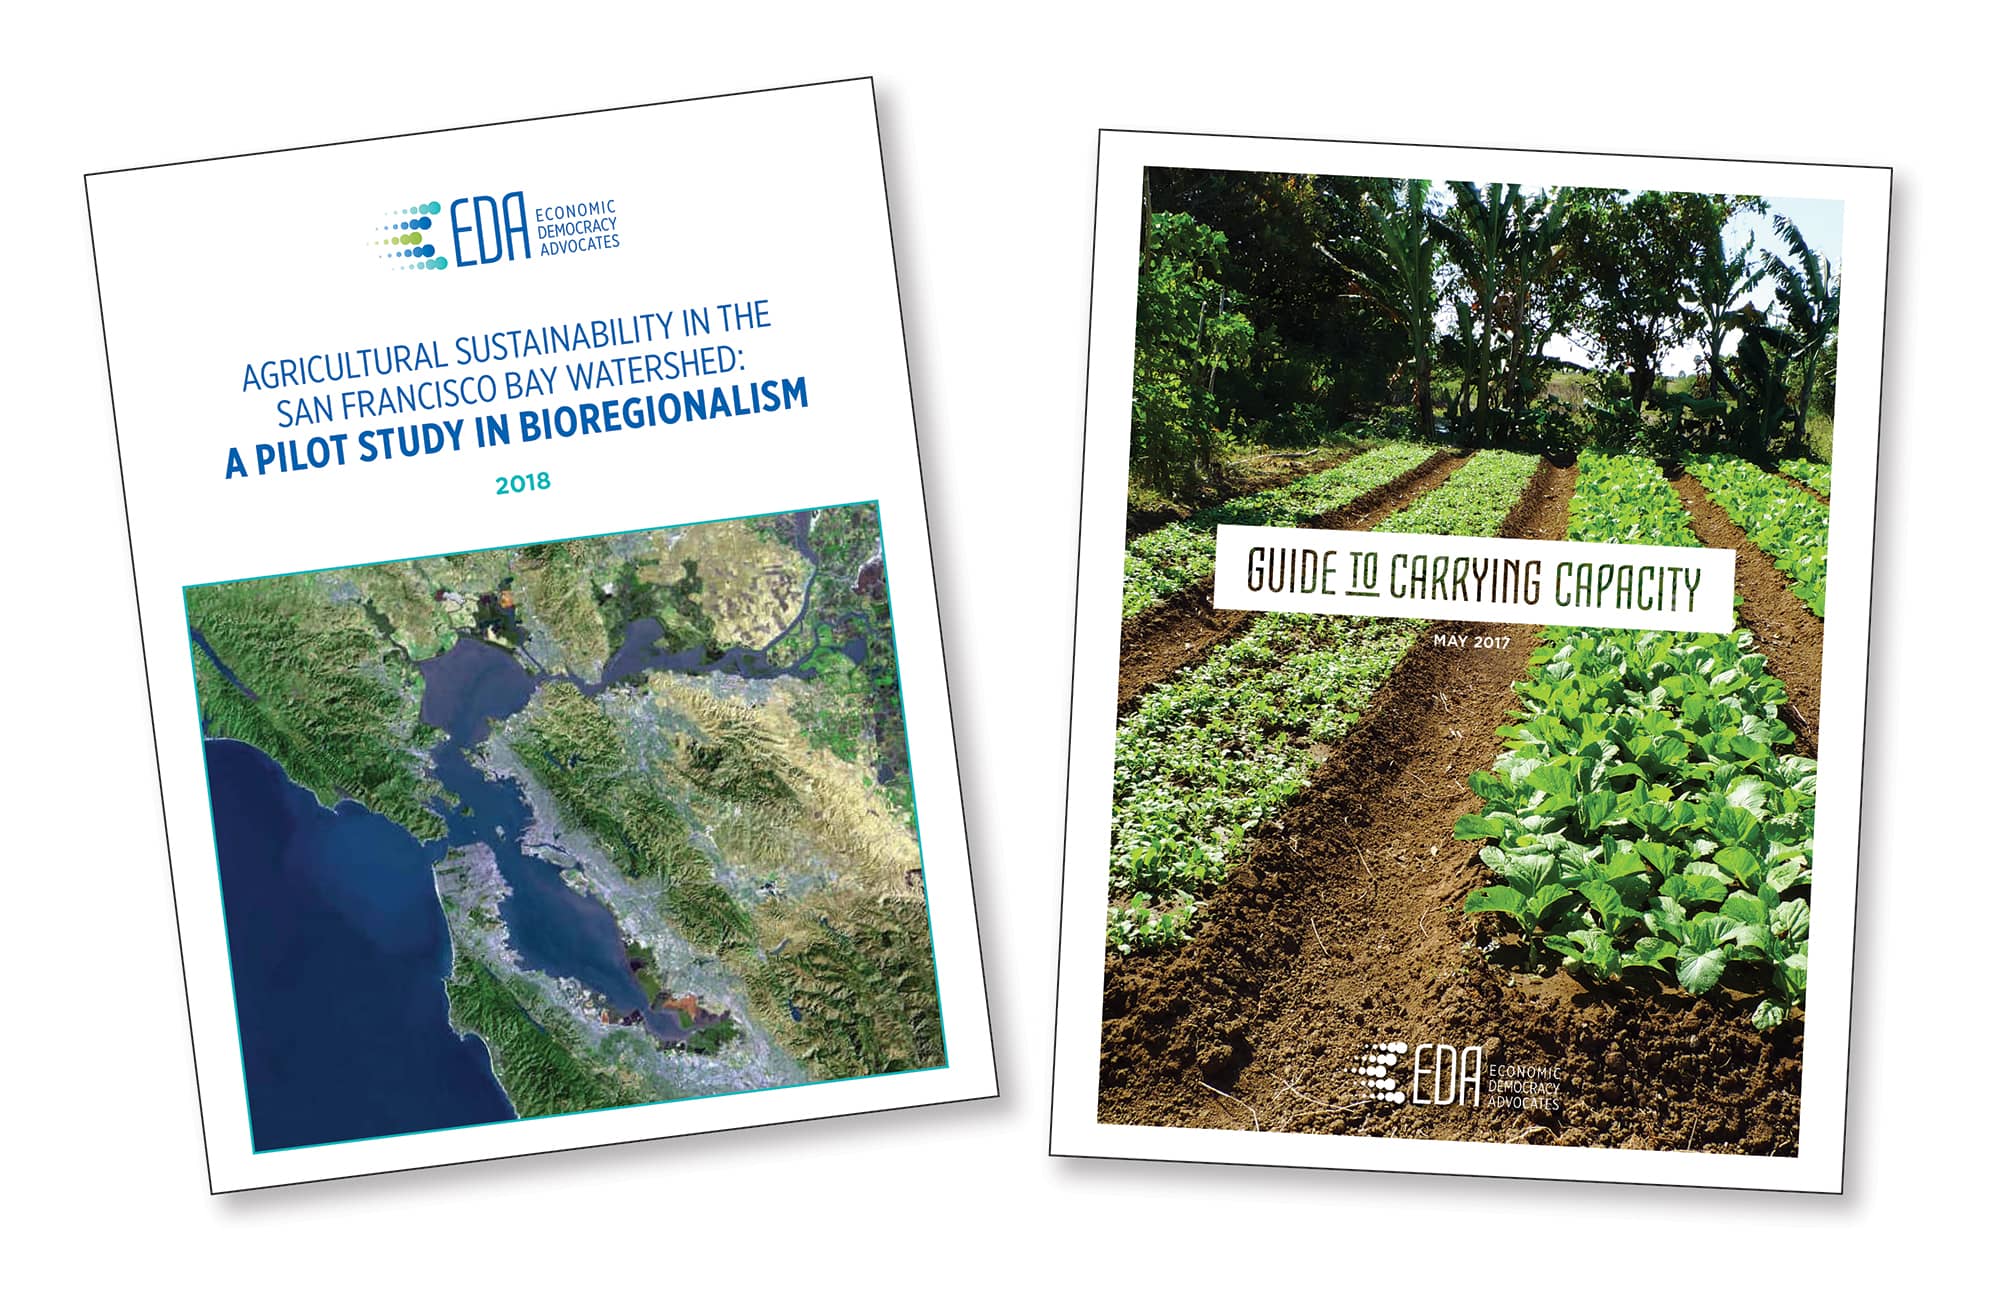 EDA report covers read, “Agricultural Sustainability in the San Francisco Bay watershed: A Pilot Study in Bioregionalism” and “Guide to Carrying Capacity”